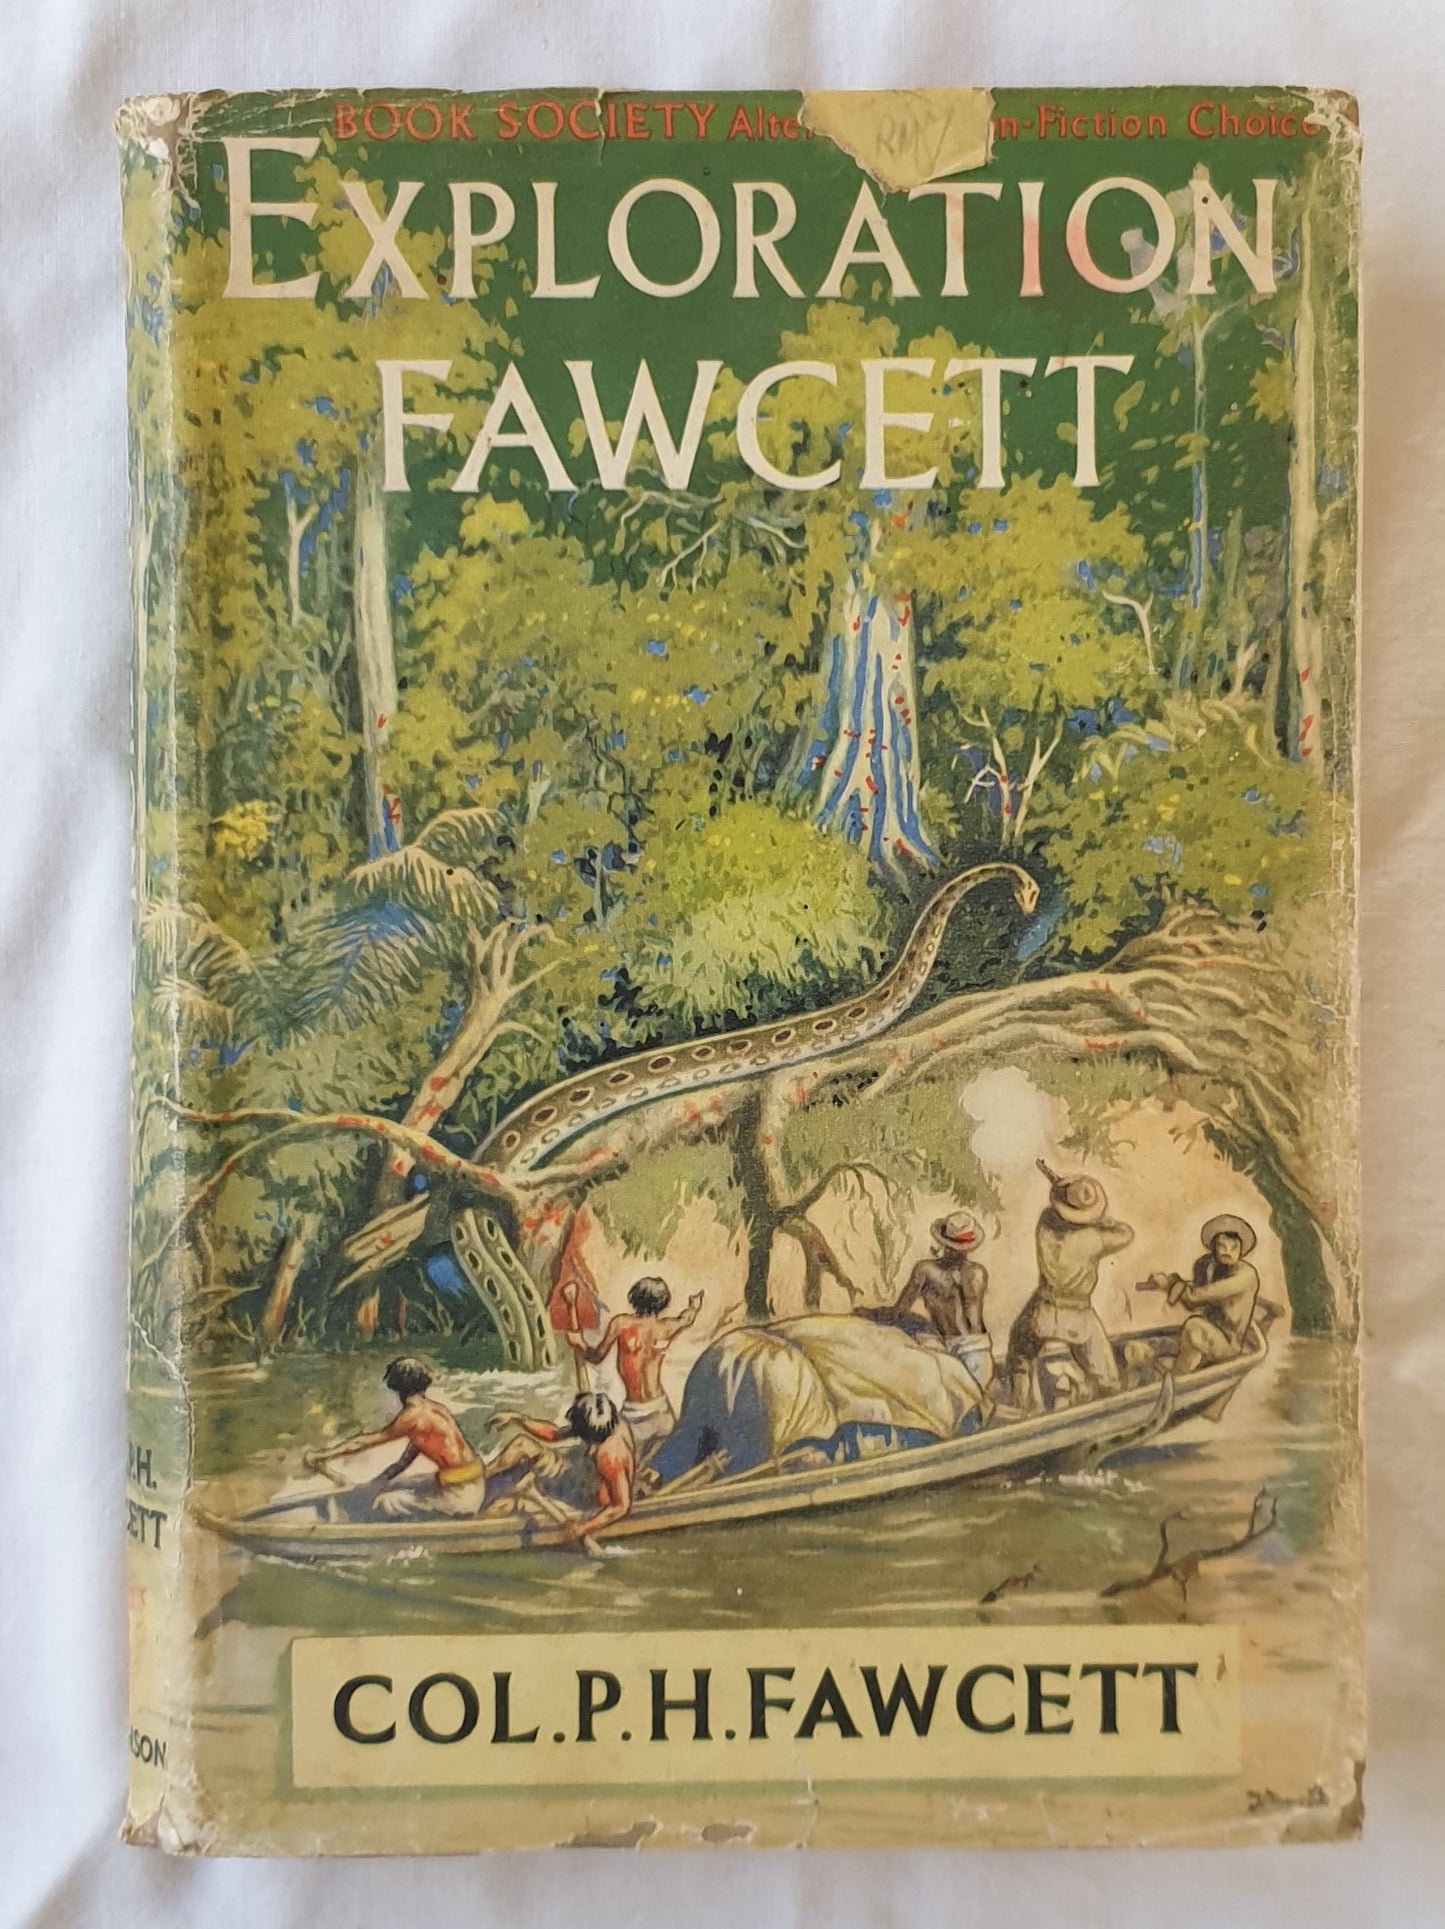 Exploration Fawcett  Arranged from his manuscripts, letters, log-books, and records by Brian Fawcett  Decorations by Brian Fawcett  by P. H. Fawcett